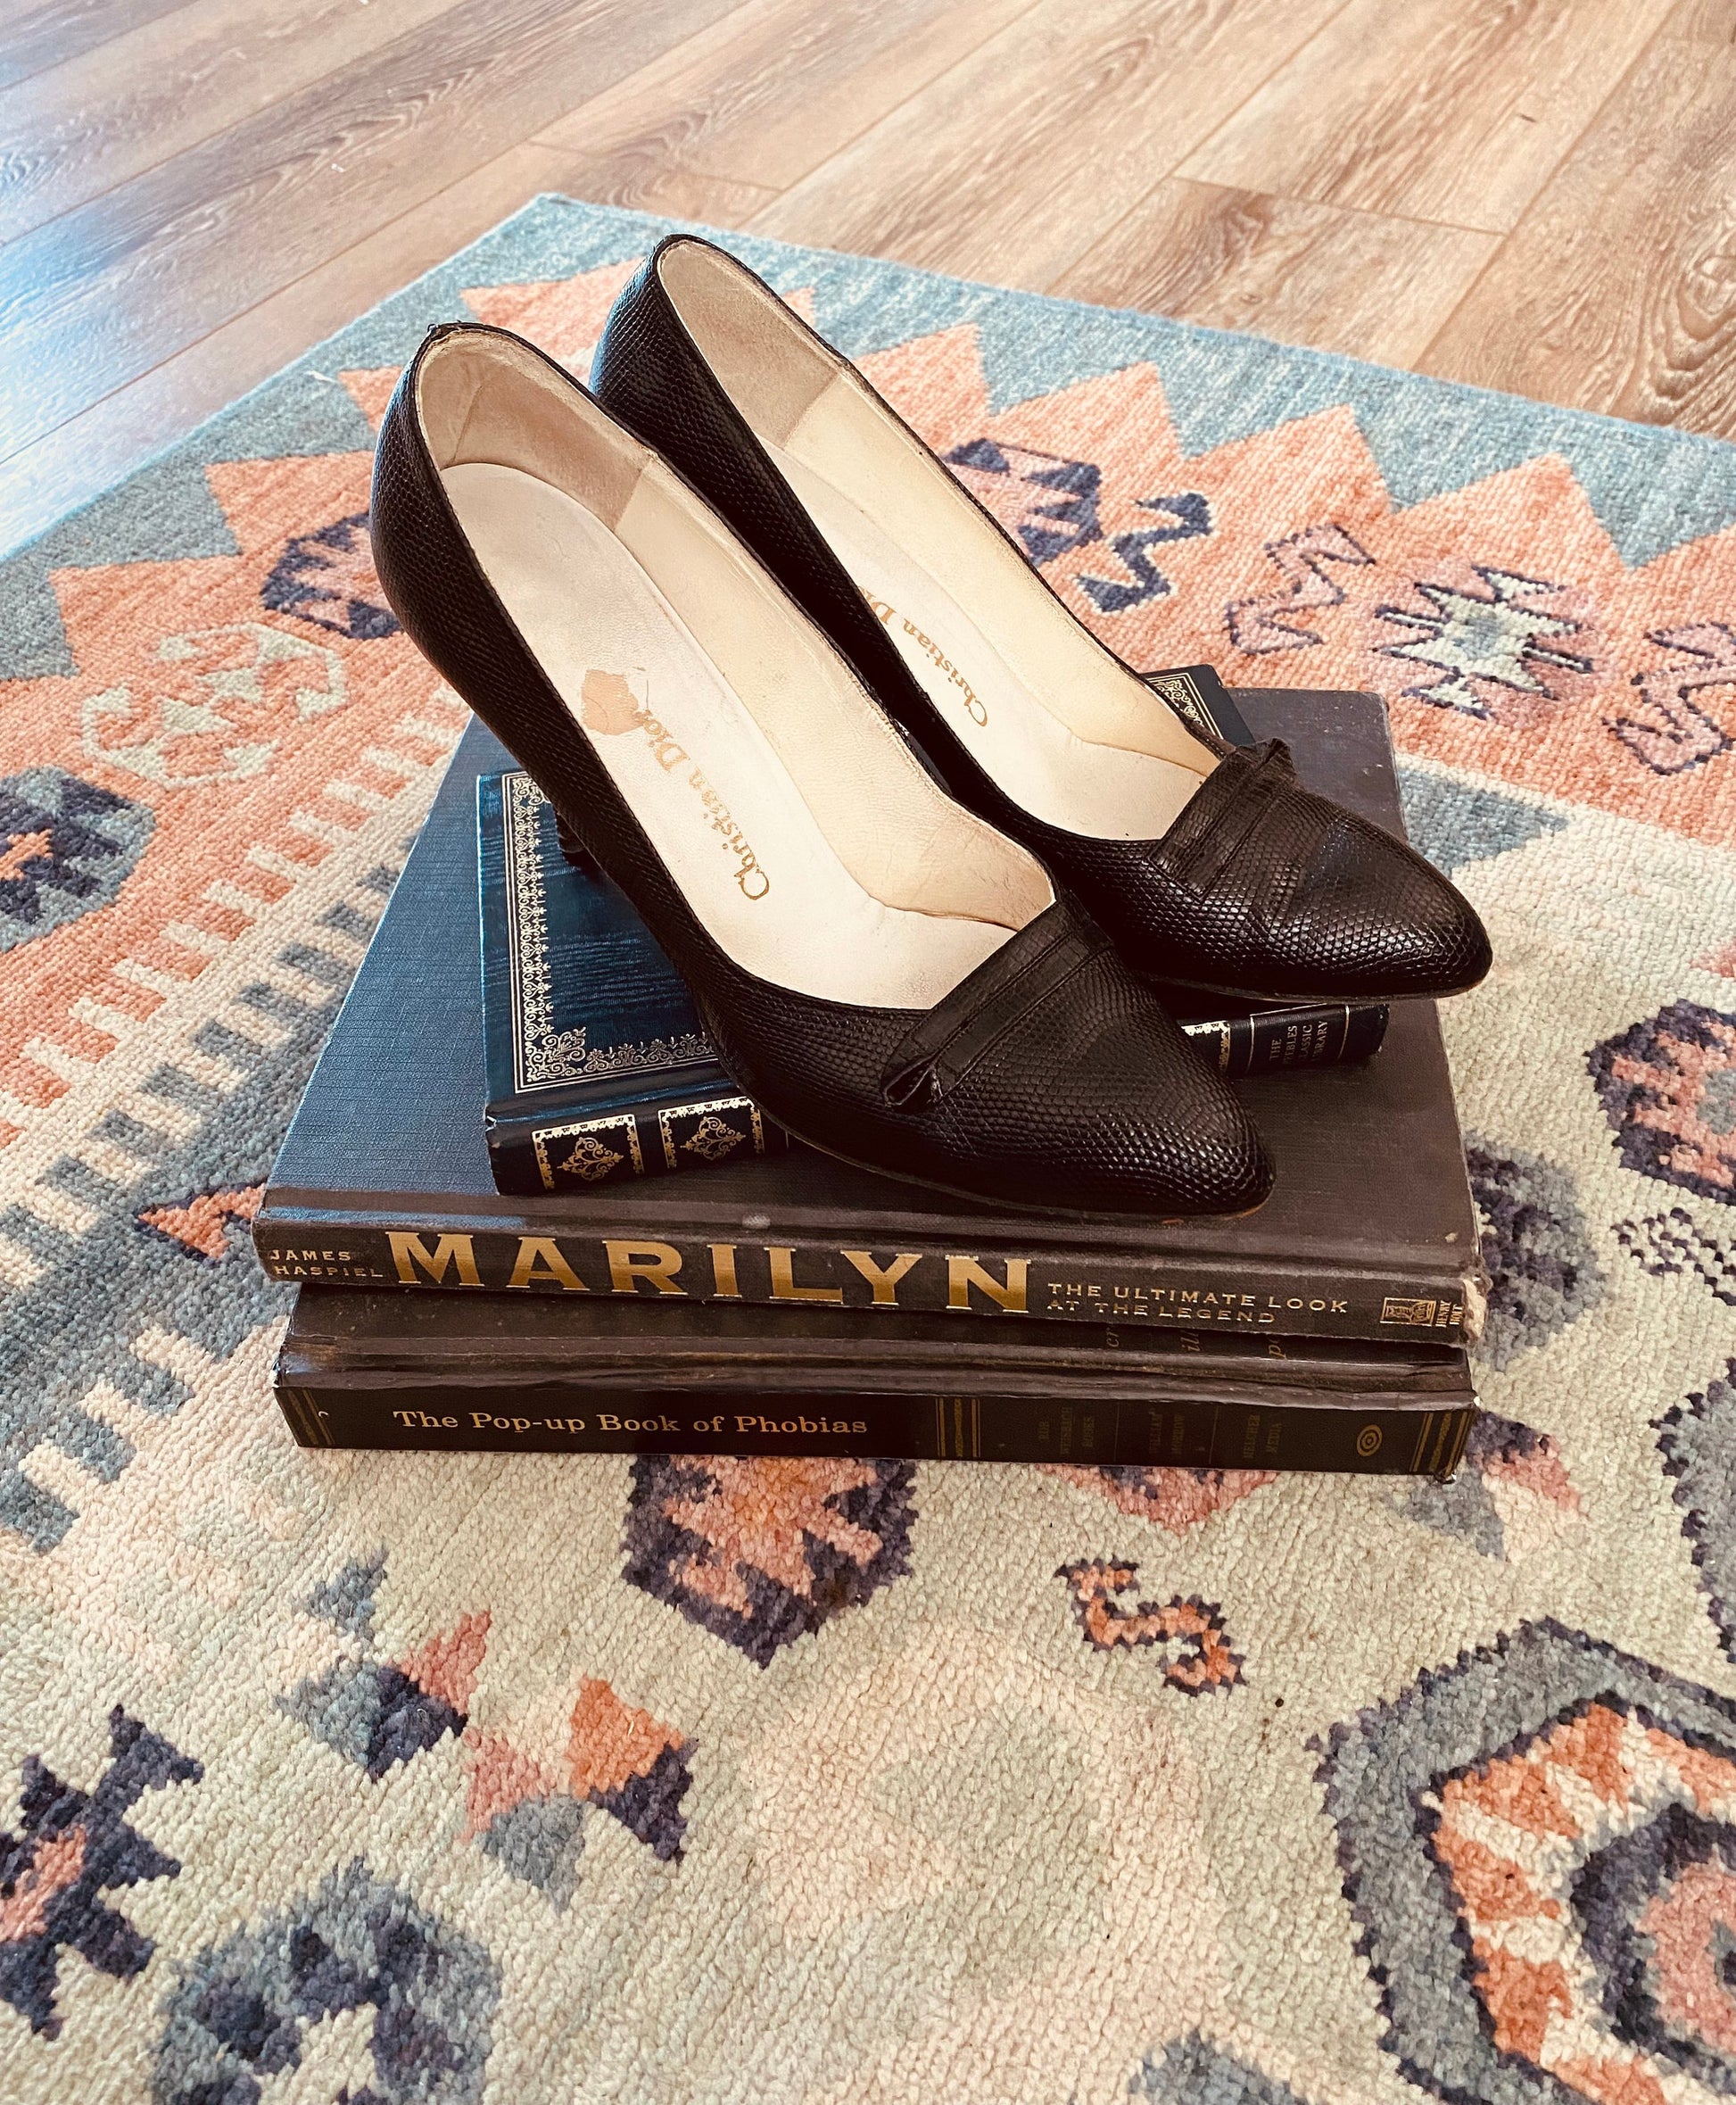 Vintage 1960s Christian Dior High Heels / 60s couture pumps size 8